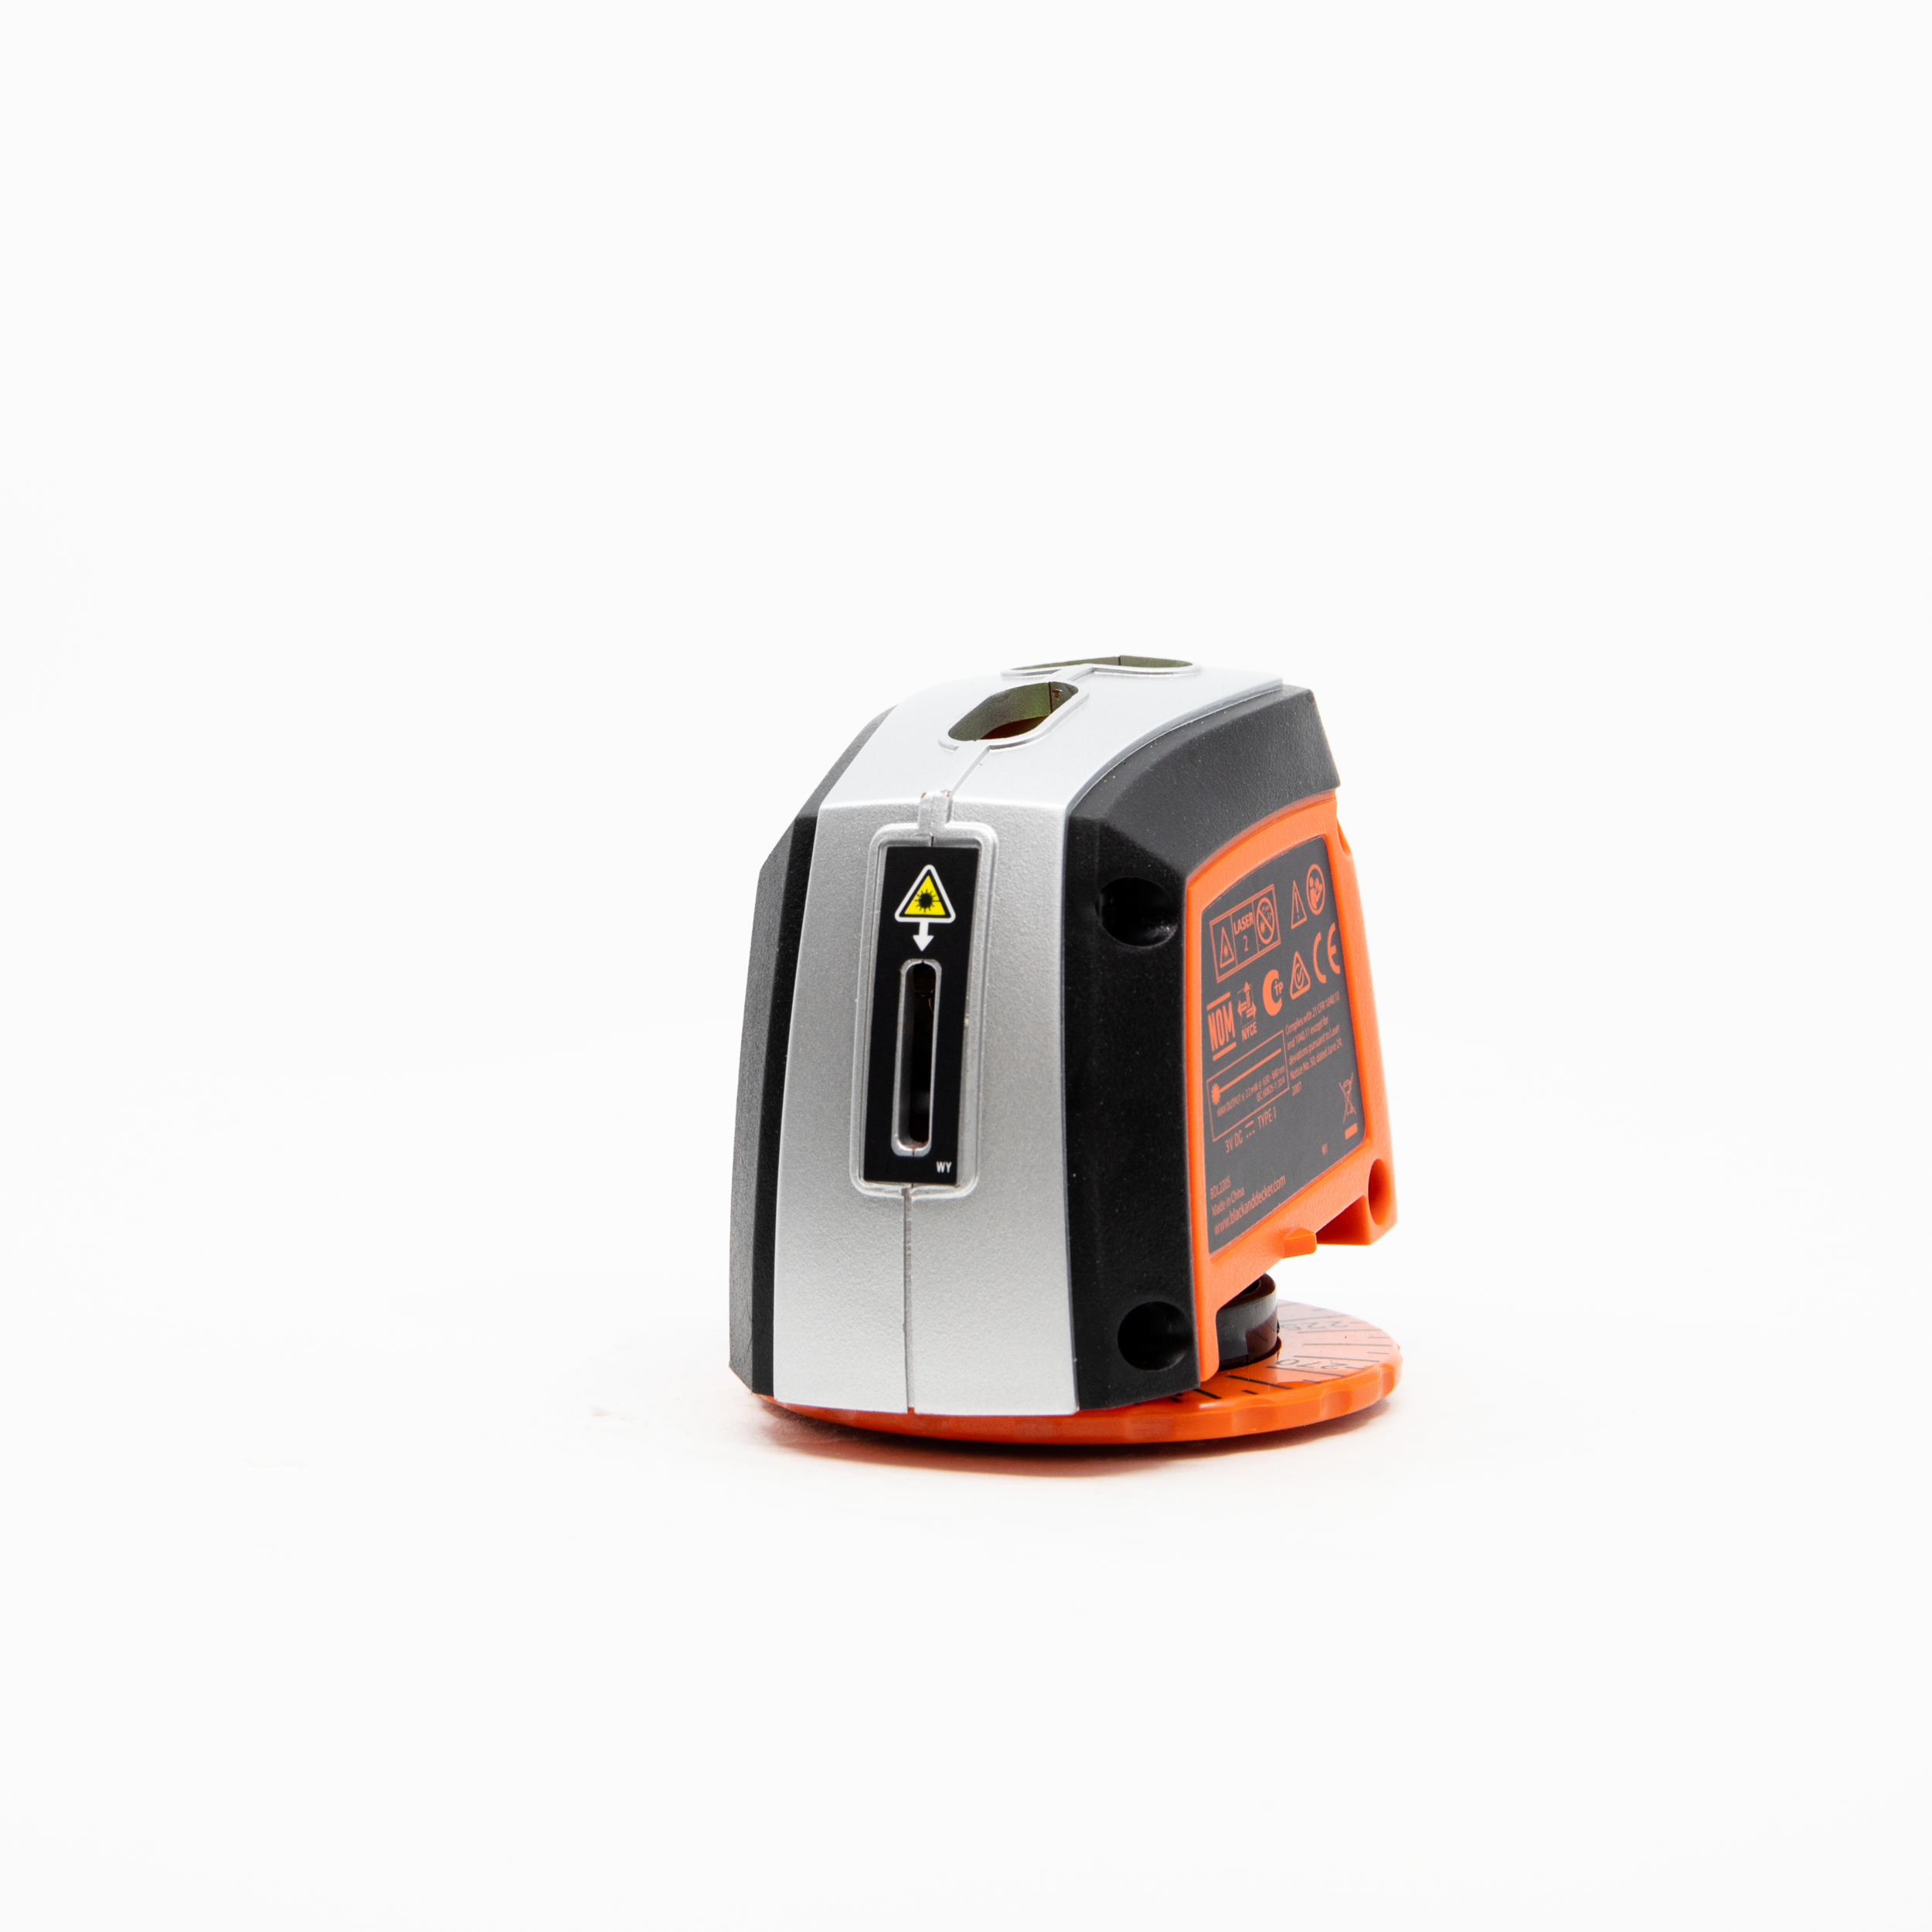 Used Black And Decker Laser Level